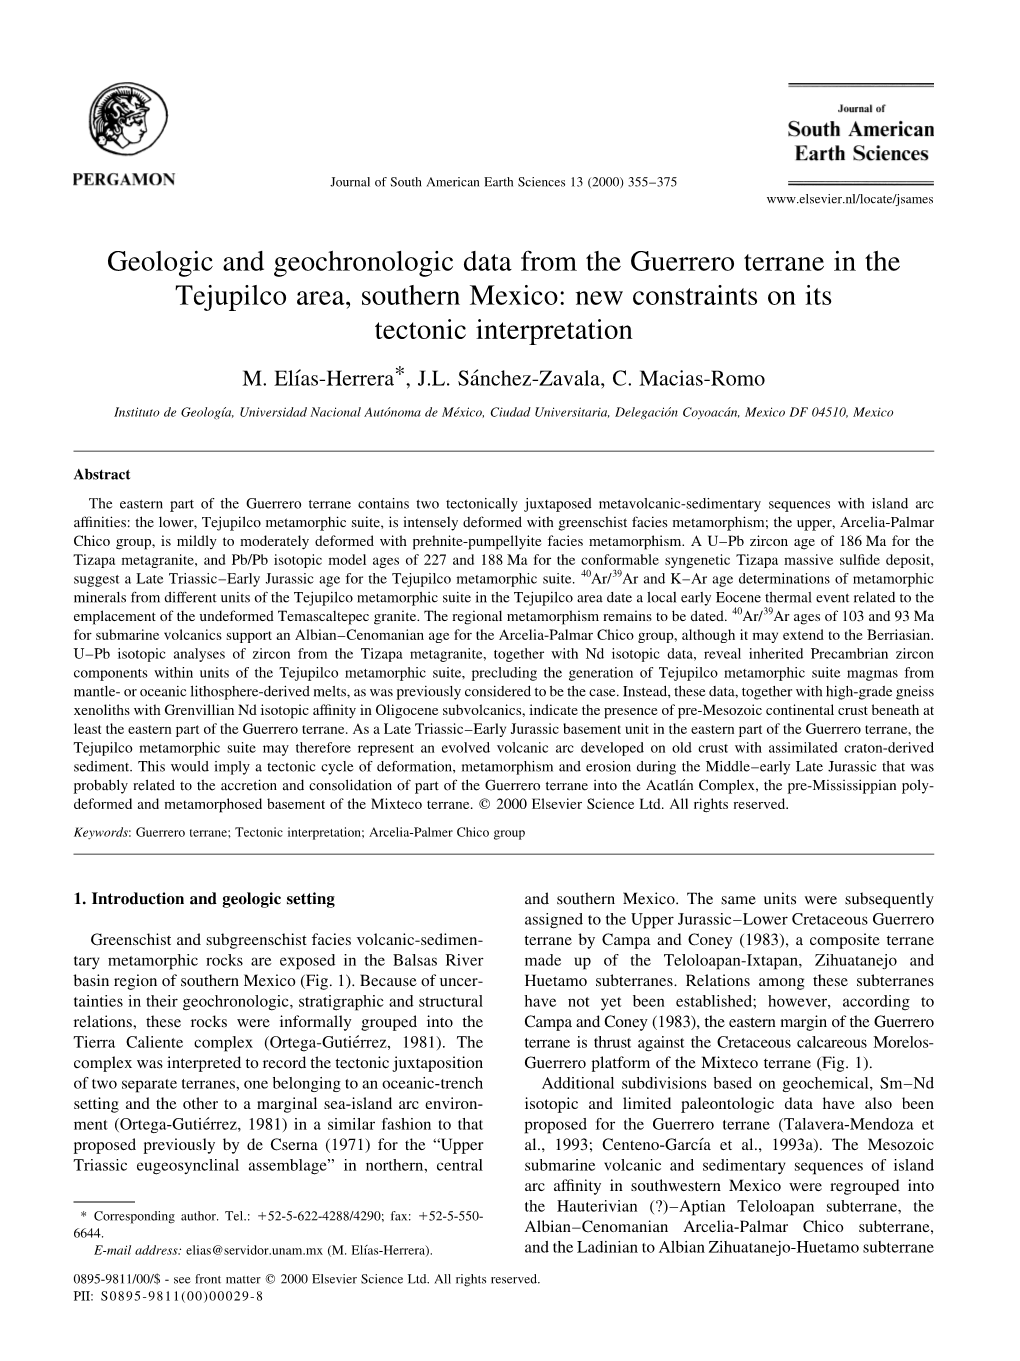 Geologic and Geochronologic Data from the Guerrero Terrane in the Tejupilco Area, Southern Mexico: New Constraints on Its Tectonic Interpretation